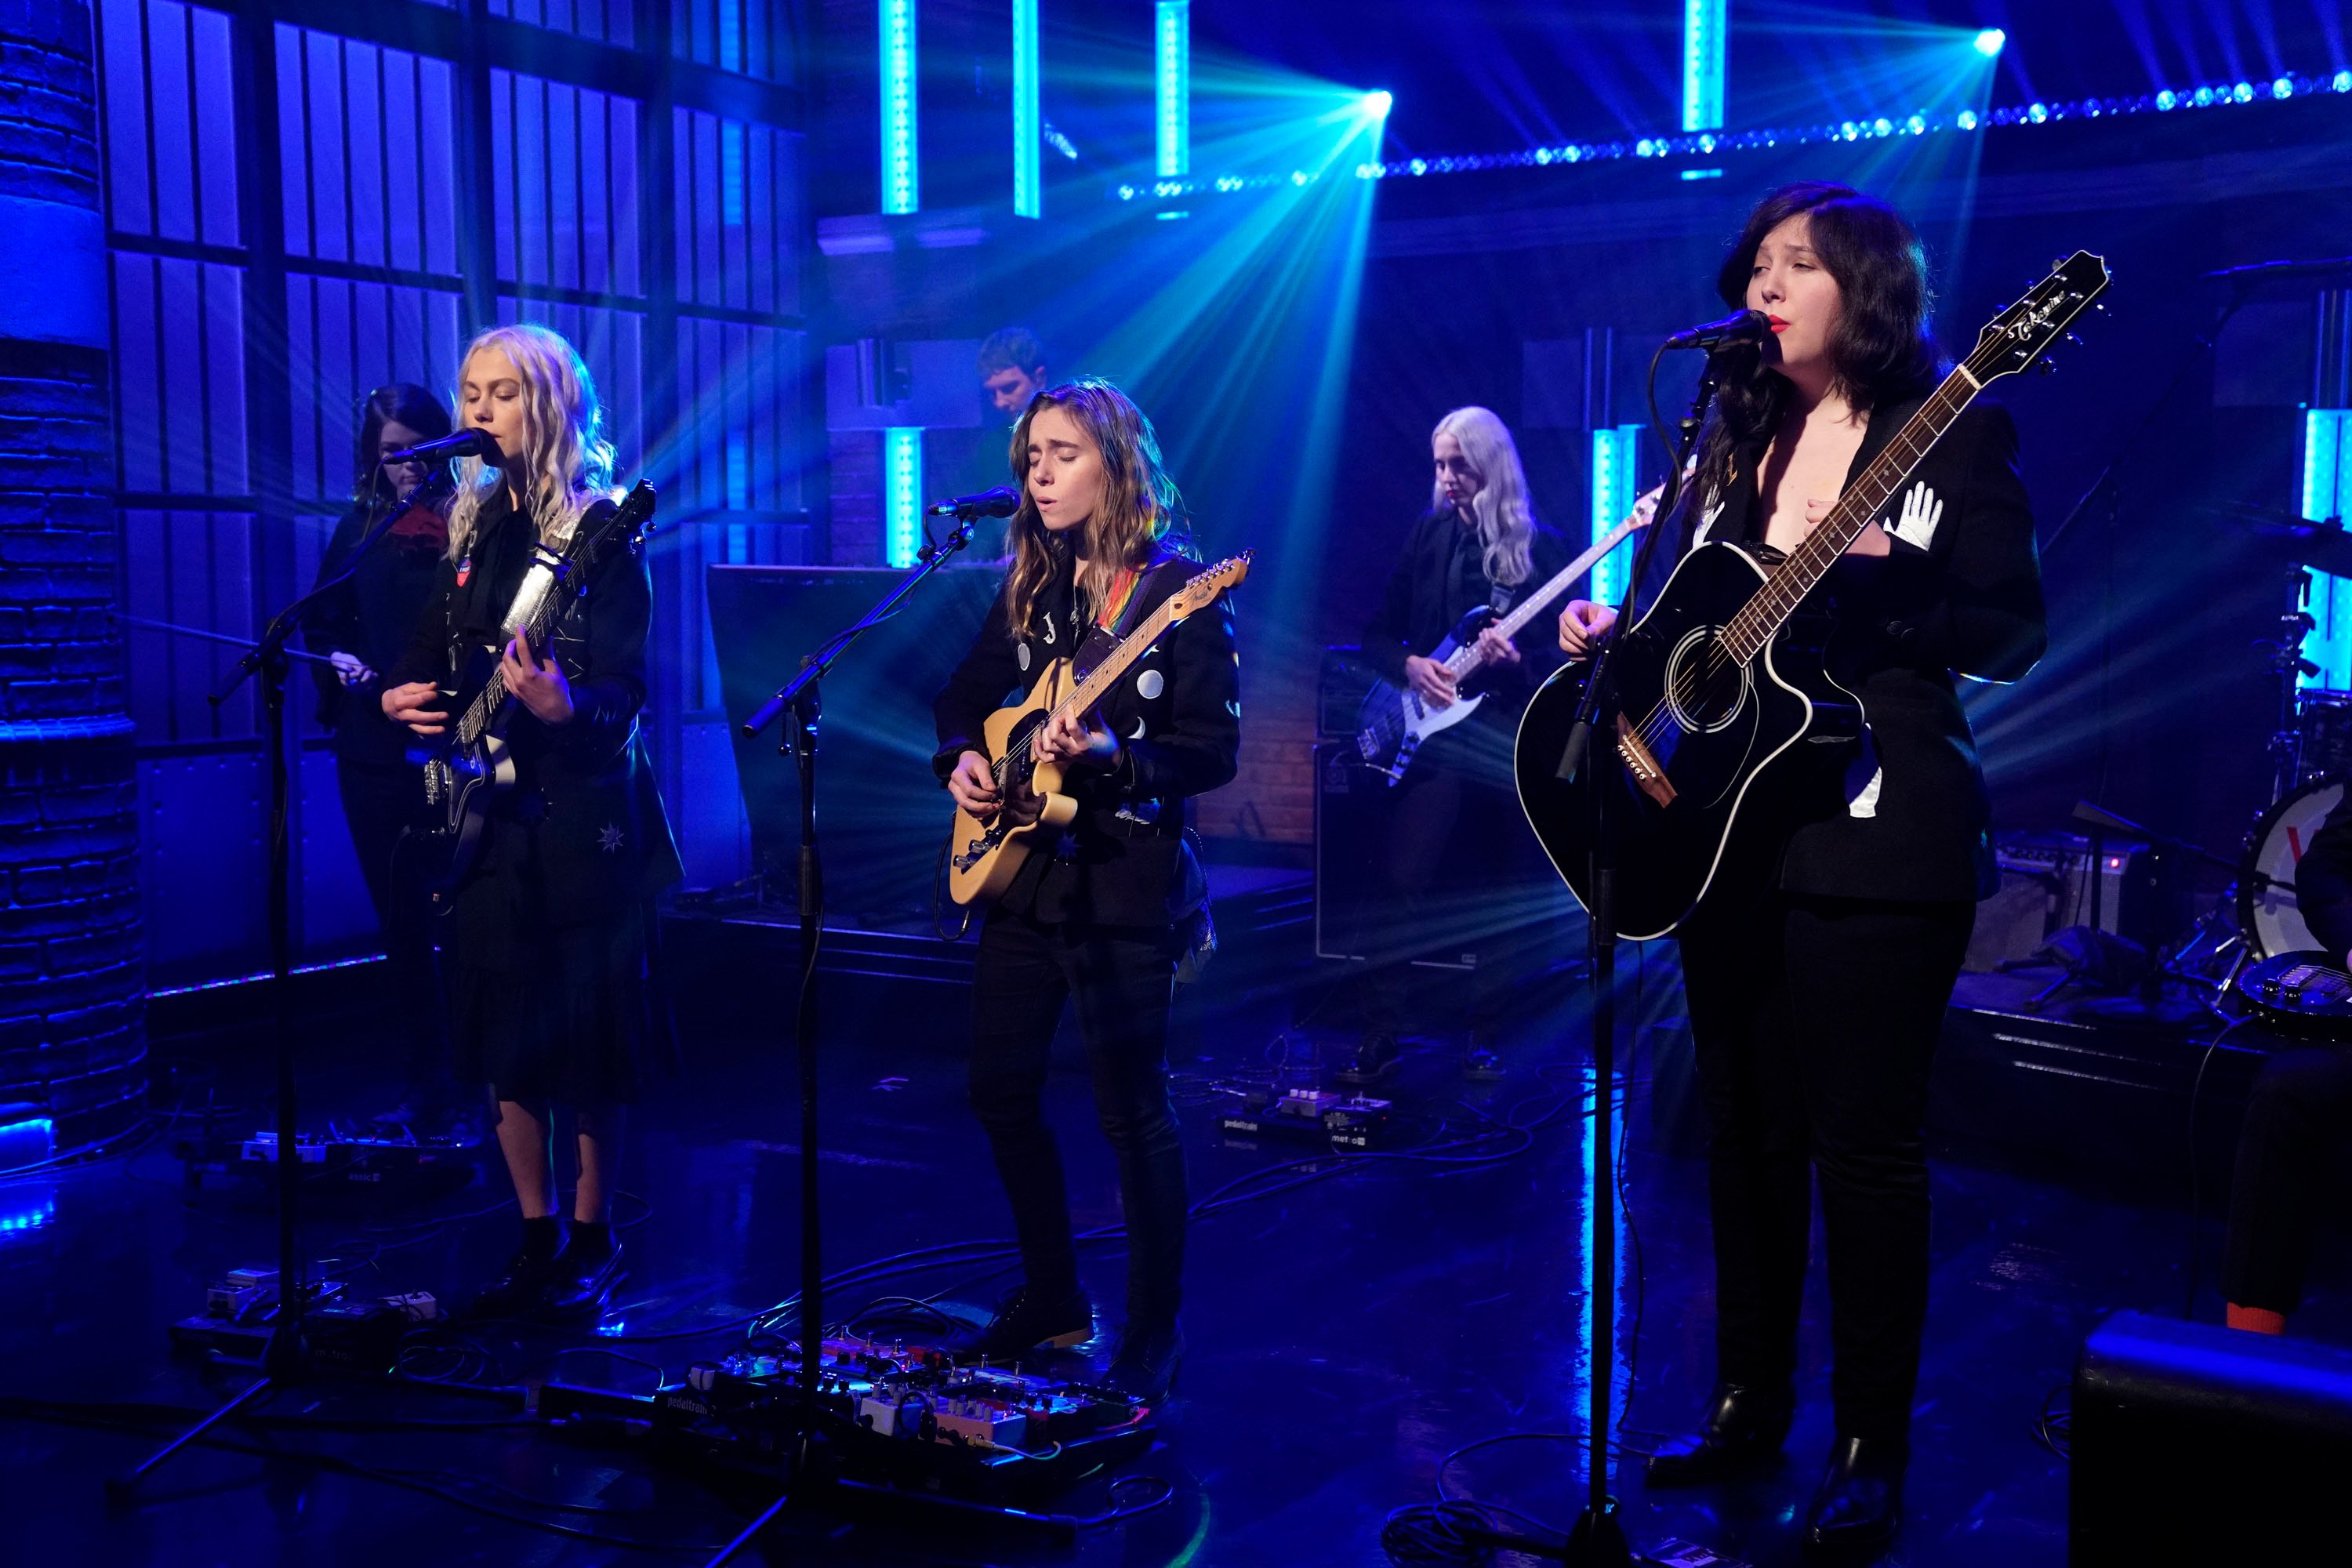 Phoebe Bridges, Julien Baker and Lucy Dacus of boygenius perform on 'Late Night with Seth Meyers'